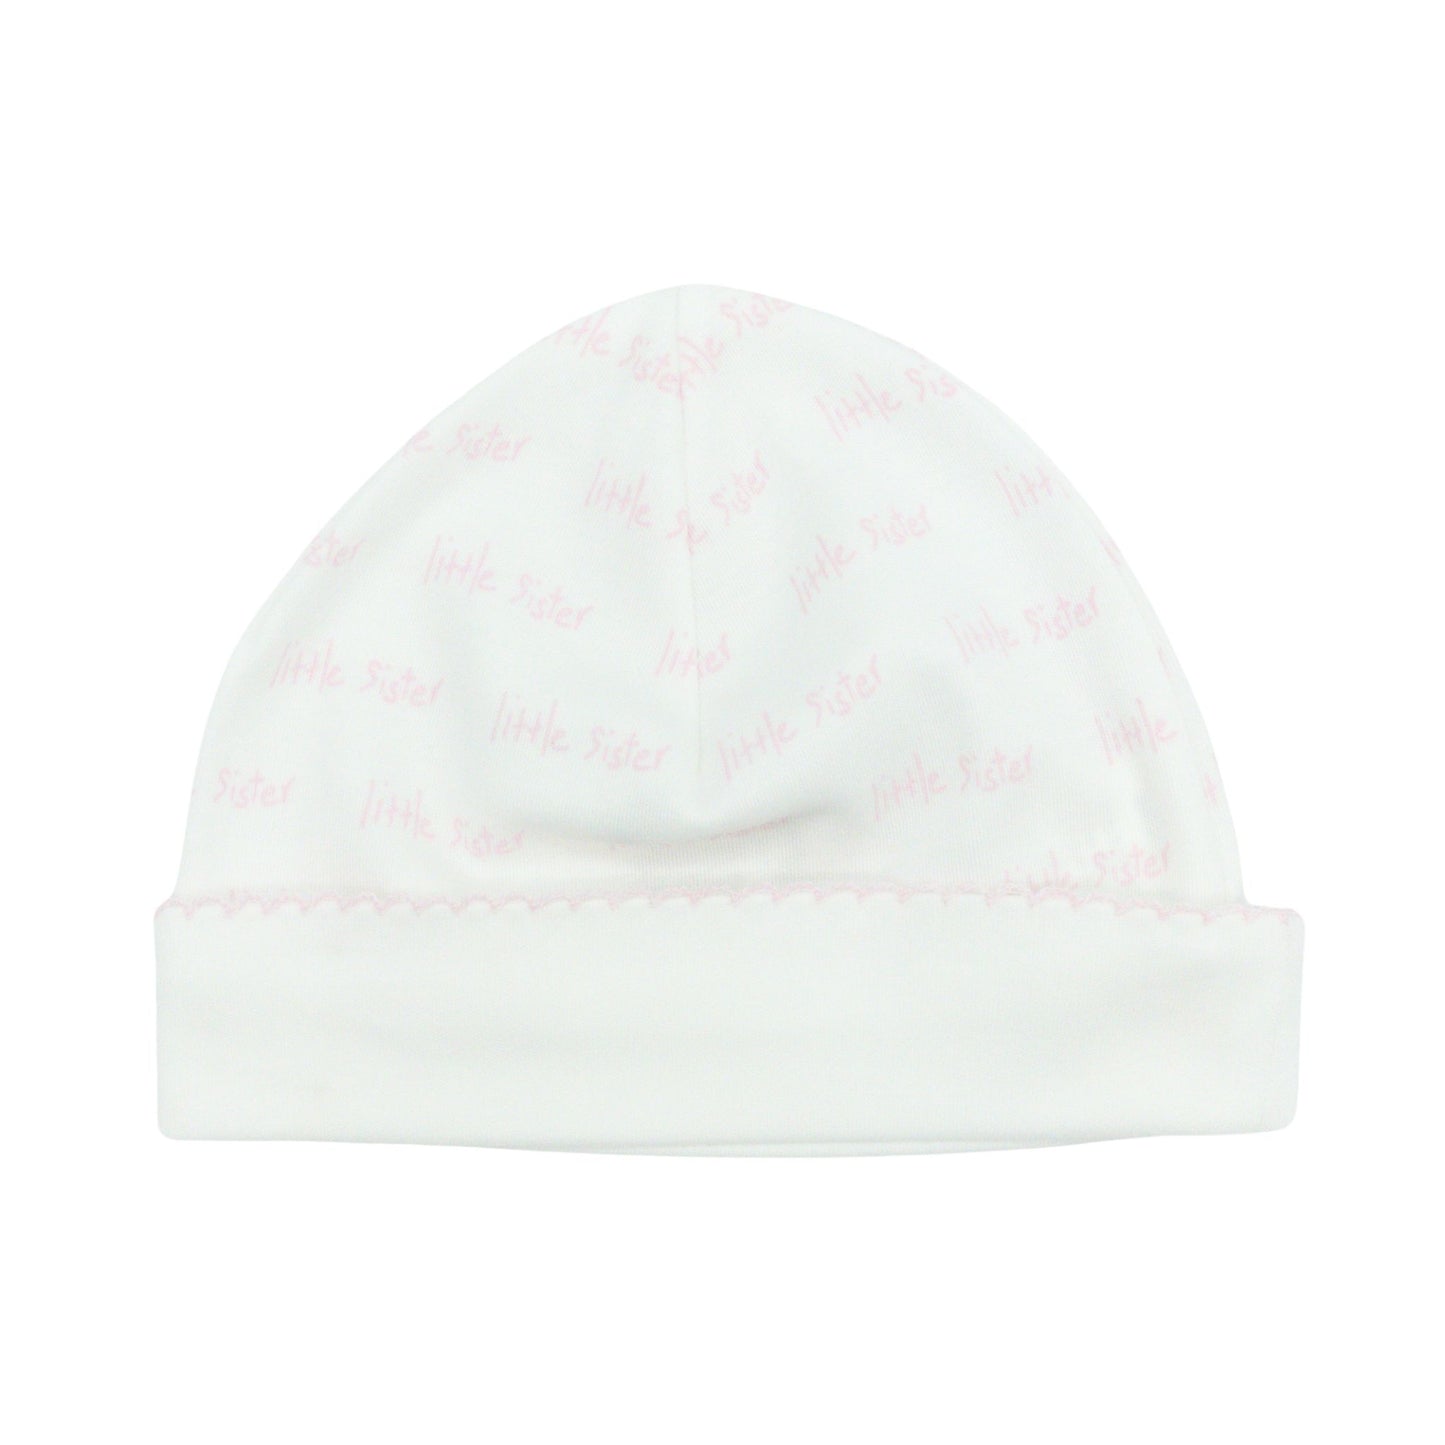 Pima Knit "Little Sister" Printed Hat